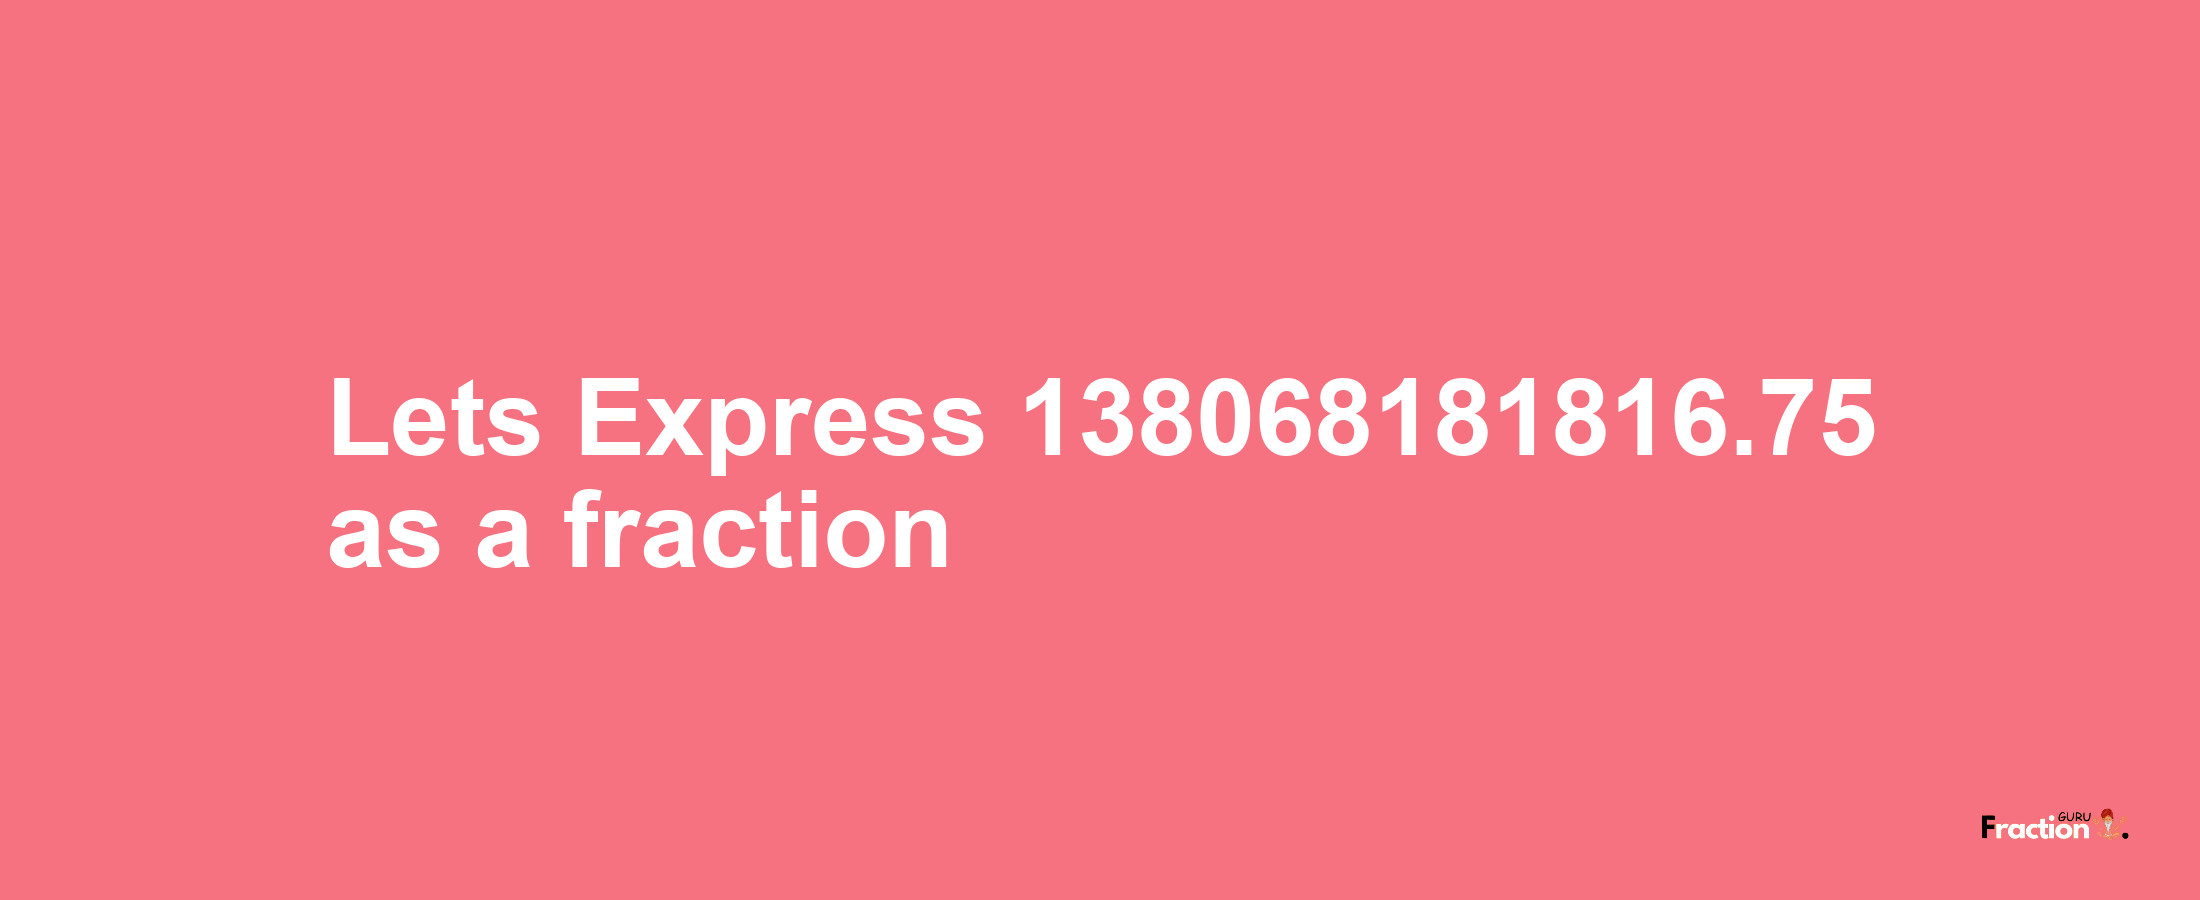 Lets Express 138068181816.75 as afraction